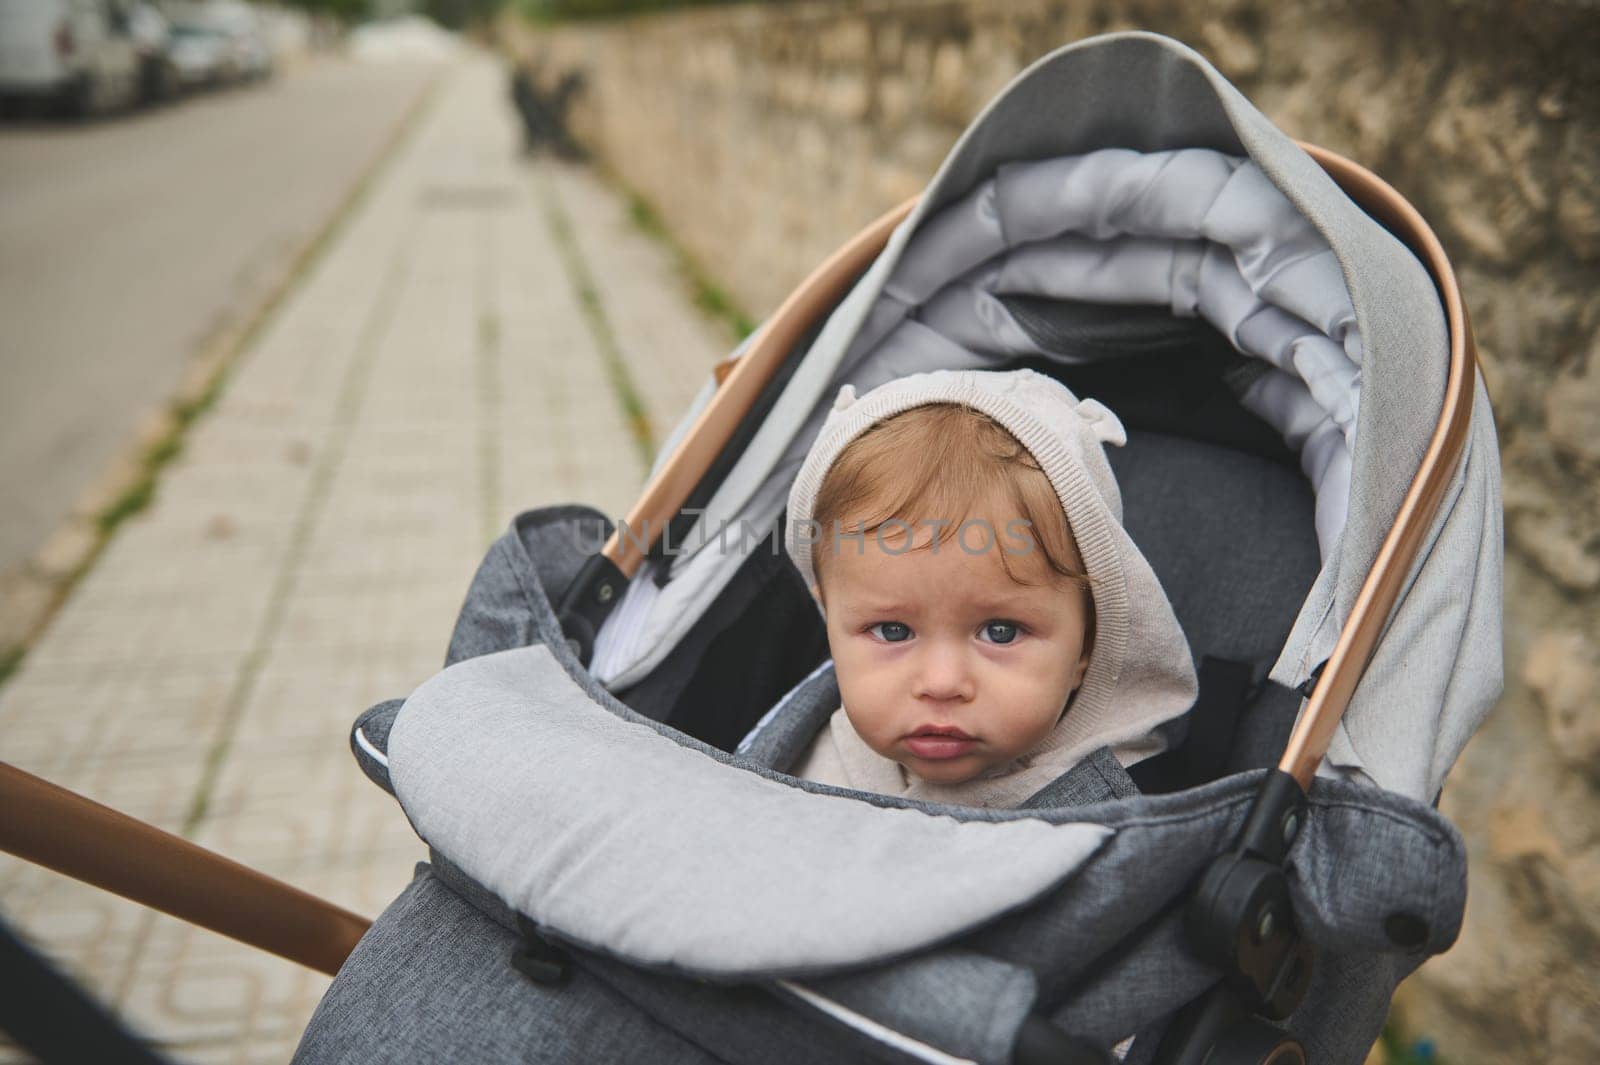 Authentic portrait of an European adorable baby boy 7-9 months old, with hood on his head, looking at the camera, sitting in a baby stroller outdoors